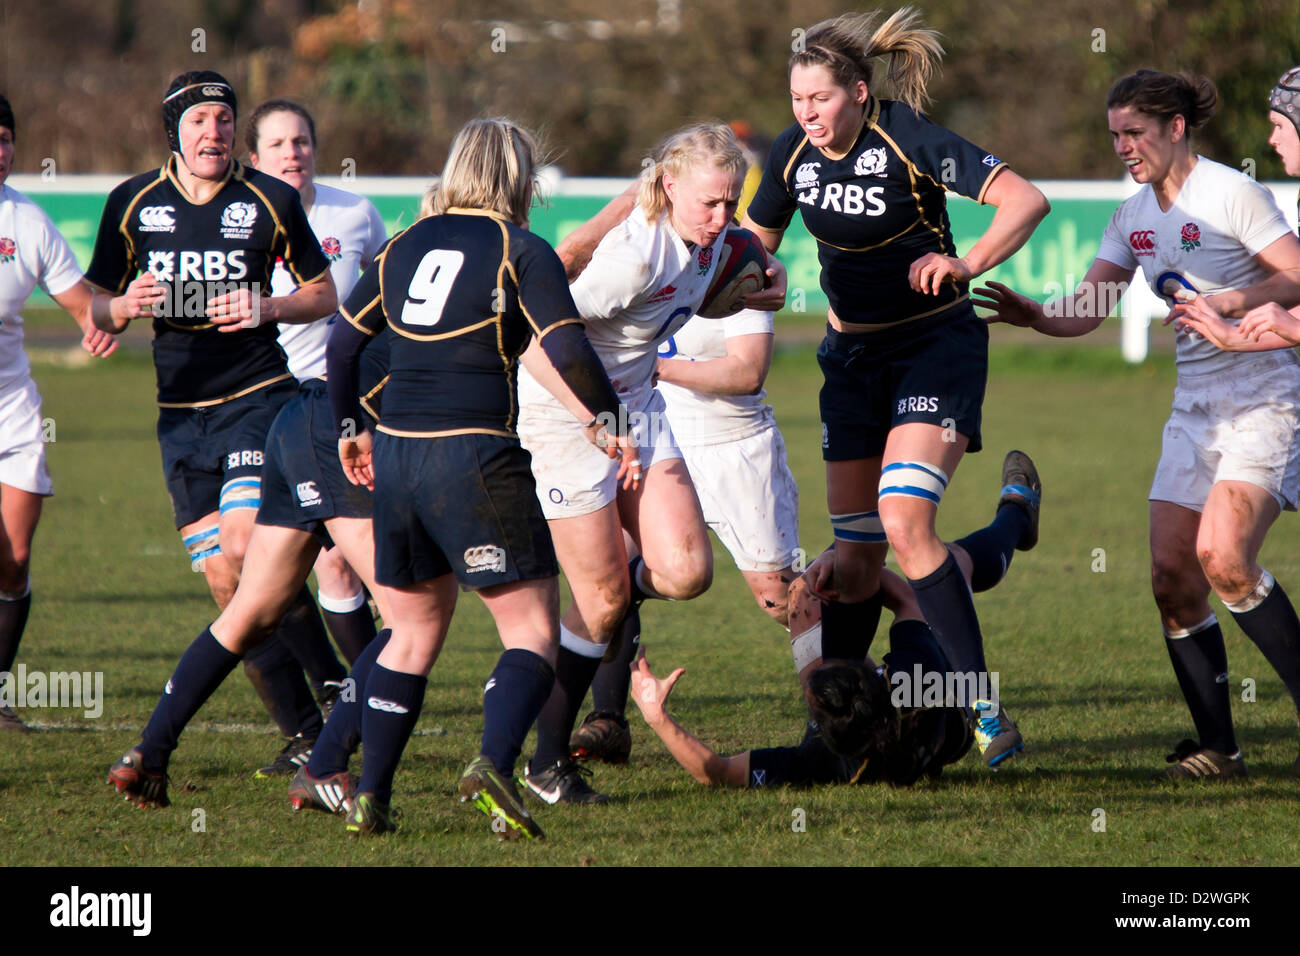 2.2.2013, ESHER, Angleterre v Ecosse Women's Rugby Six Nations. Banque D'Images